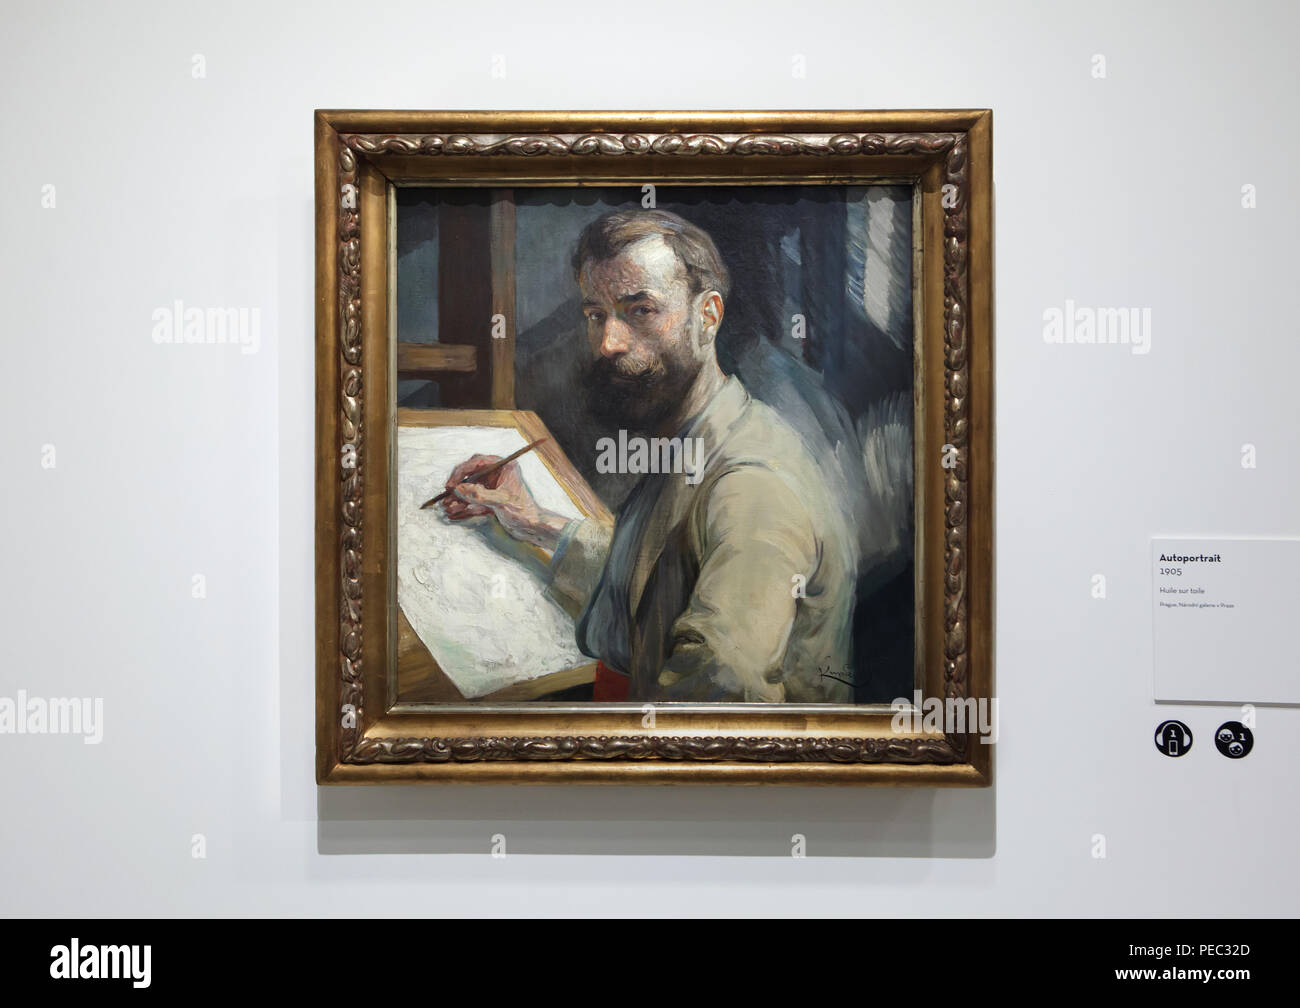 Self portrait by Czech symbolist painter František Kupka (1905) on display at his retrospective exhibition in the Grand Palais in Paris, France. The exhibition runs till 30 July 2018. Stock Photo